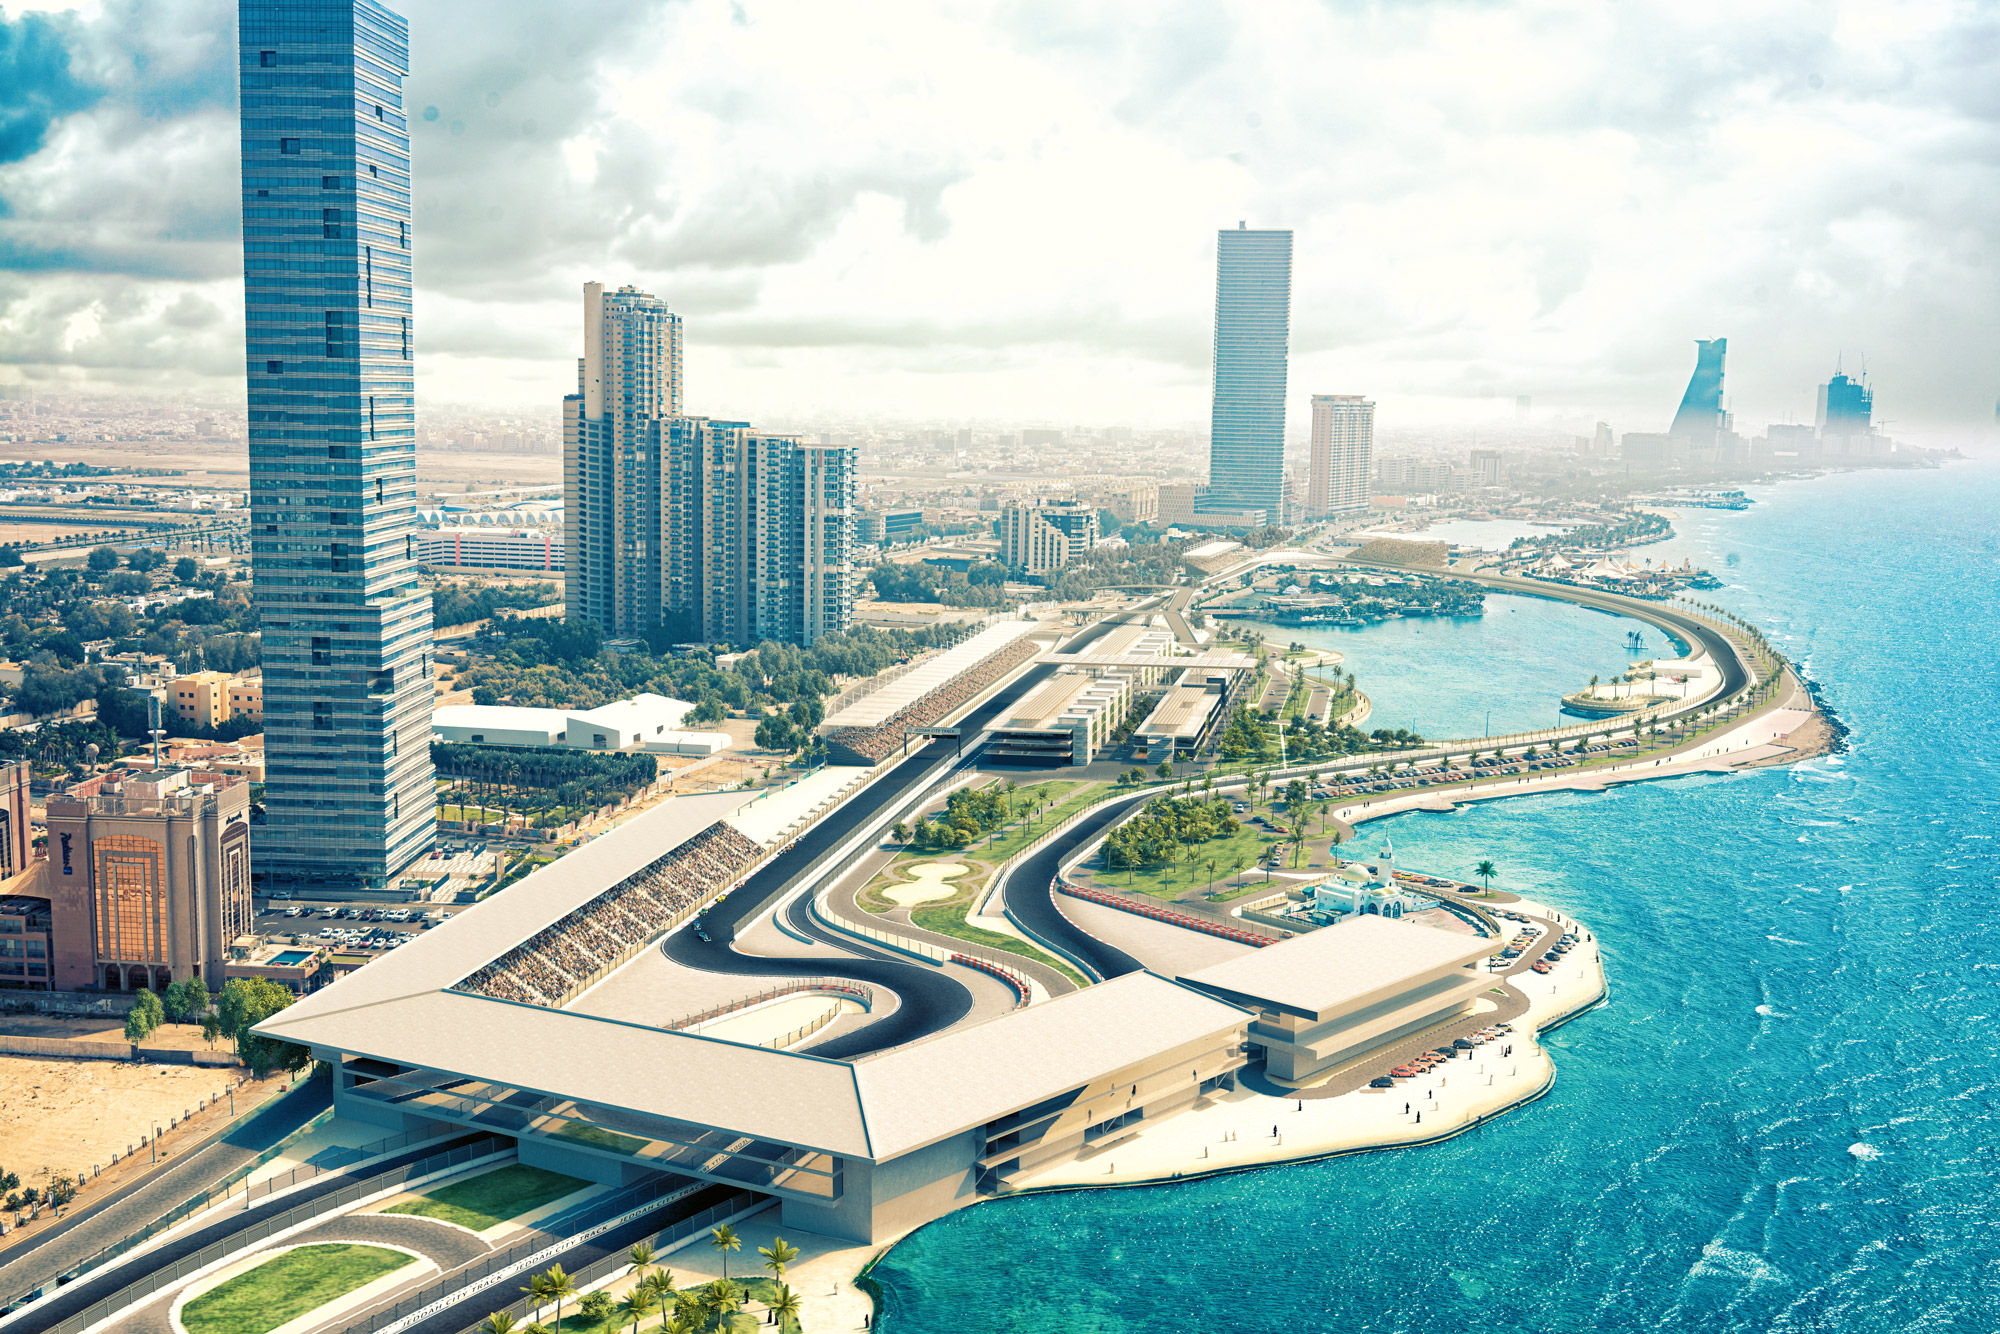 Rendering of the track built in Jeddah